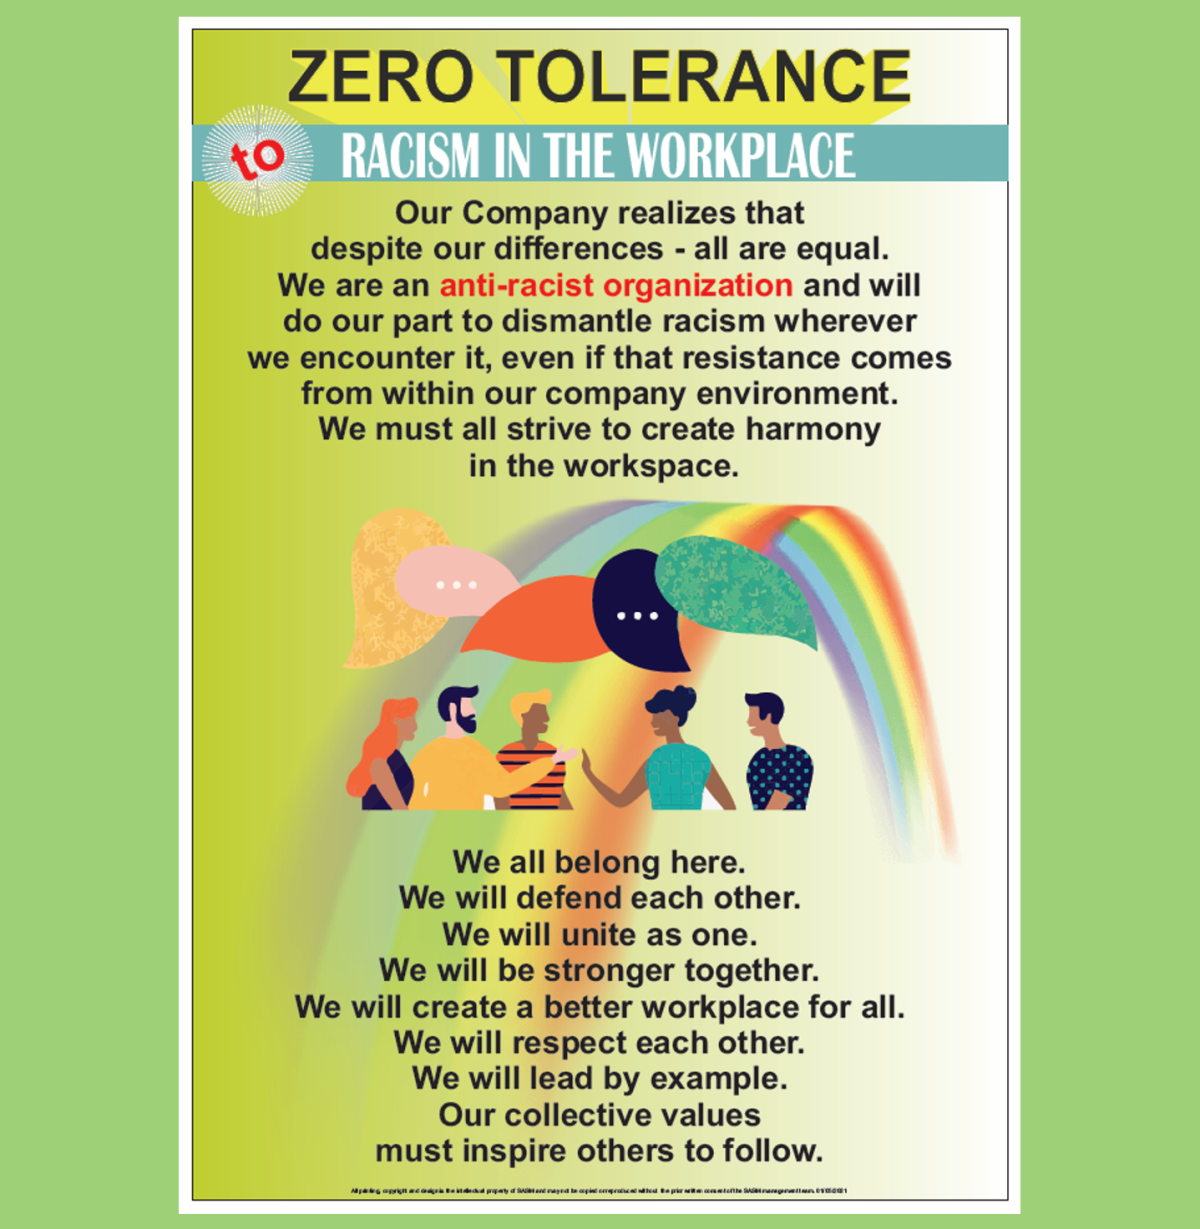 ZERO TOLERANCE - RACISM in the WORKPLACE